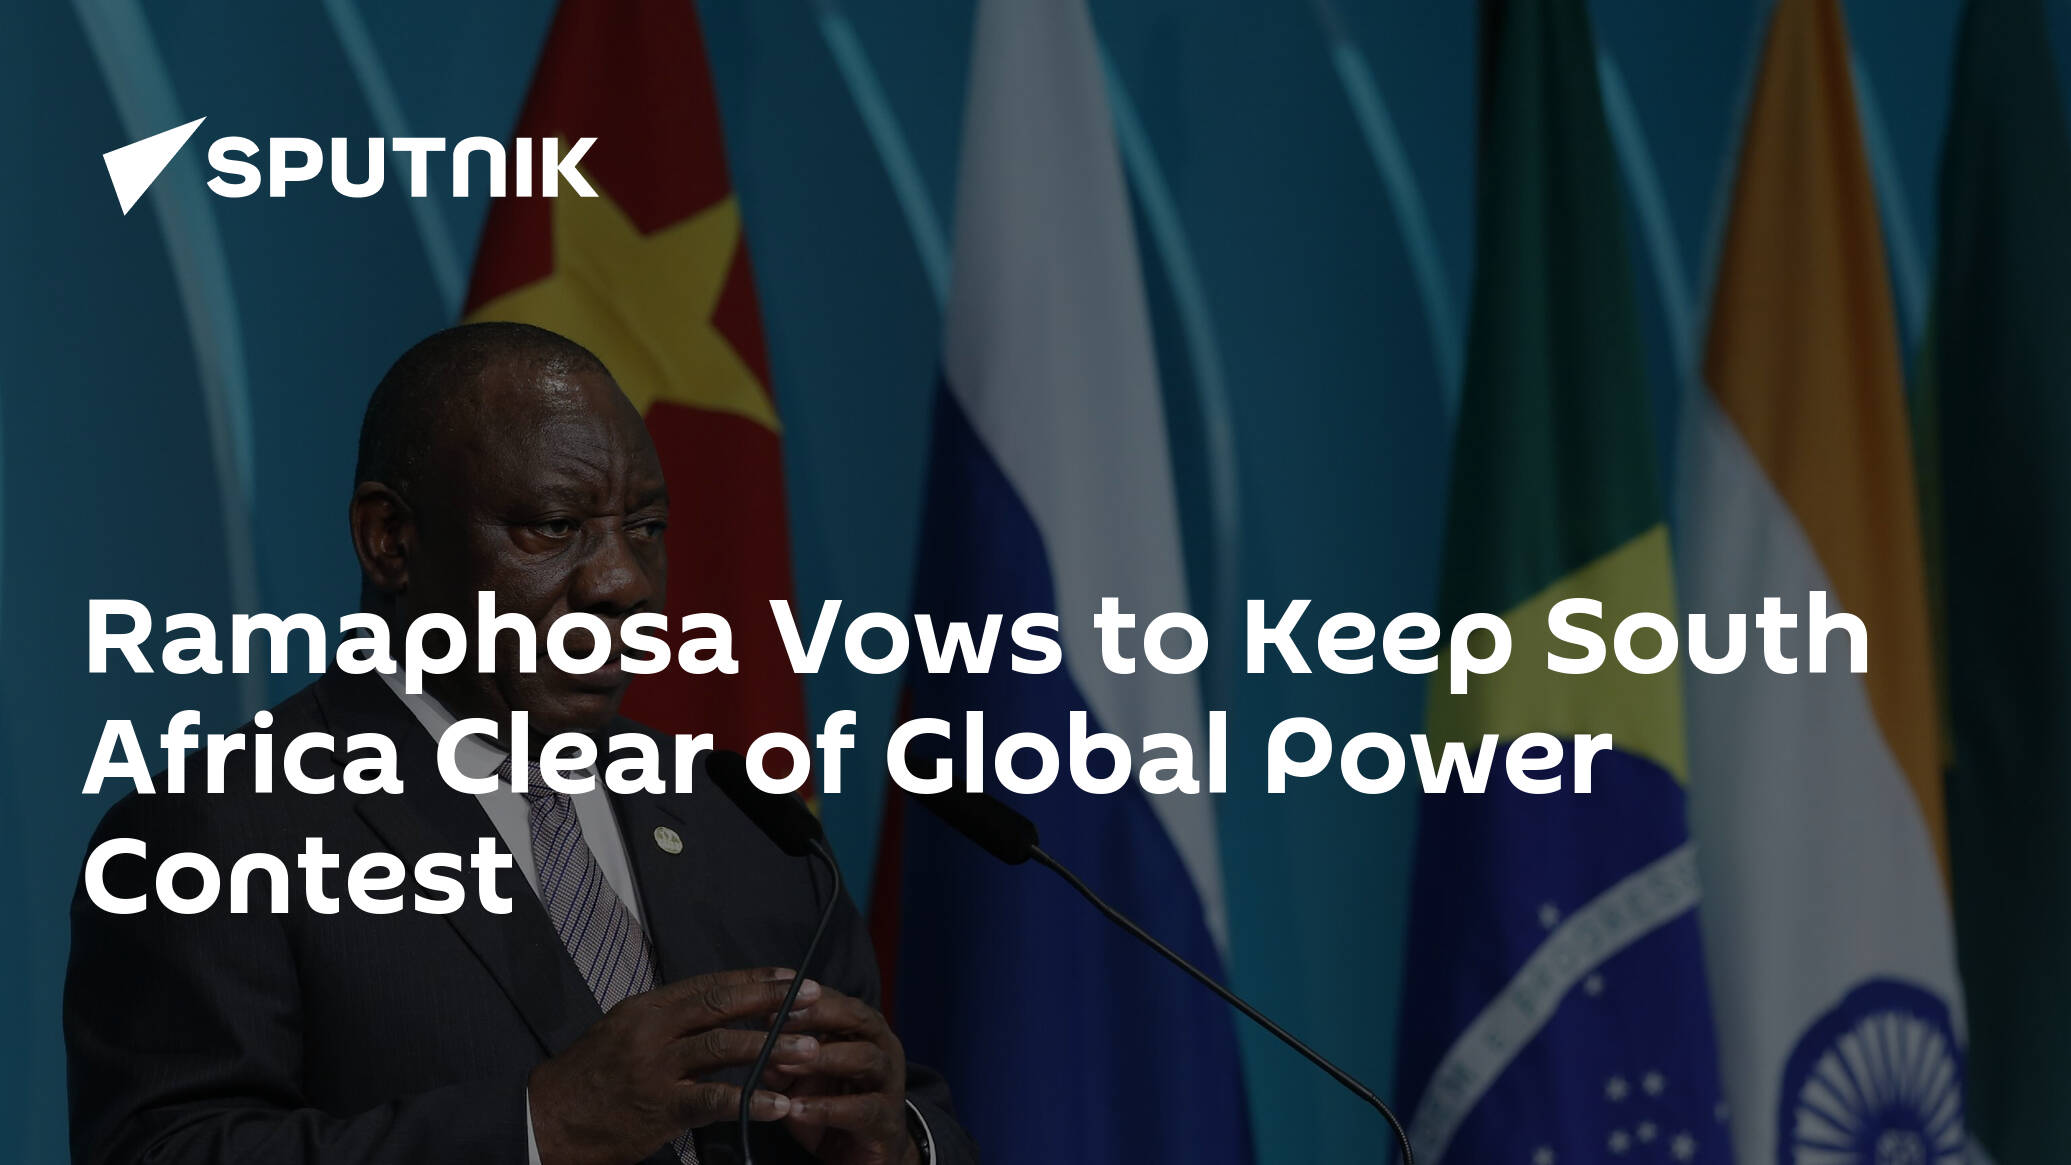 Ramaphosa Vows to Keep South Africa Clear of Global Power Contest